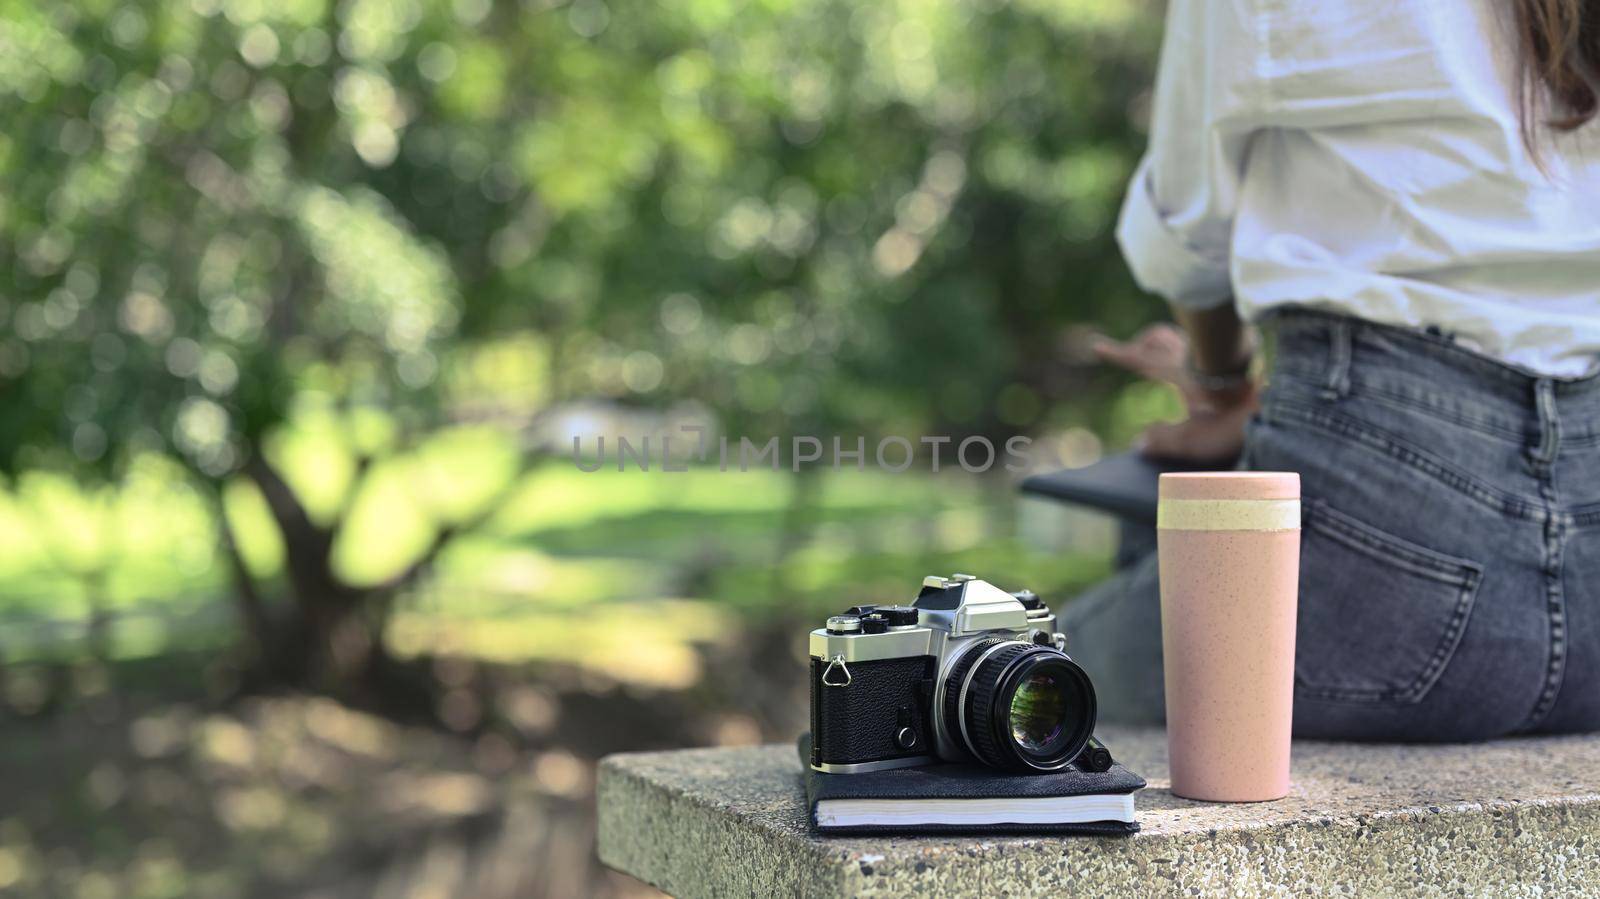 Retro camera, coffee cup and book on bench in nature park.